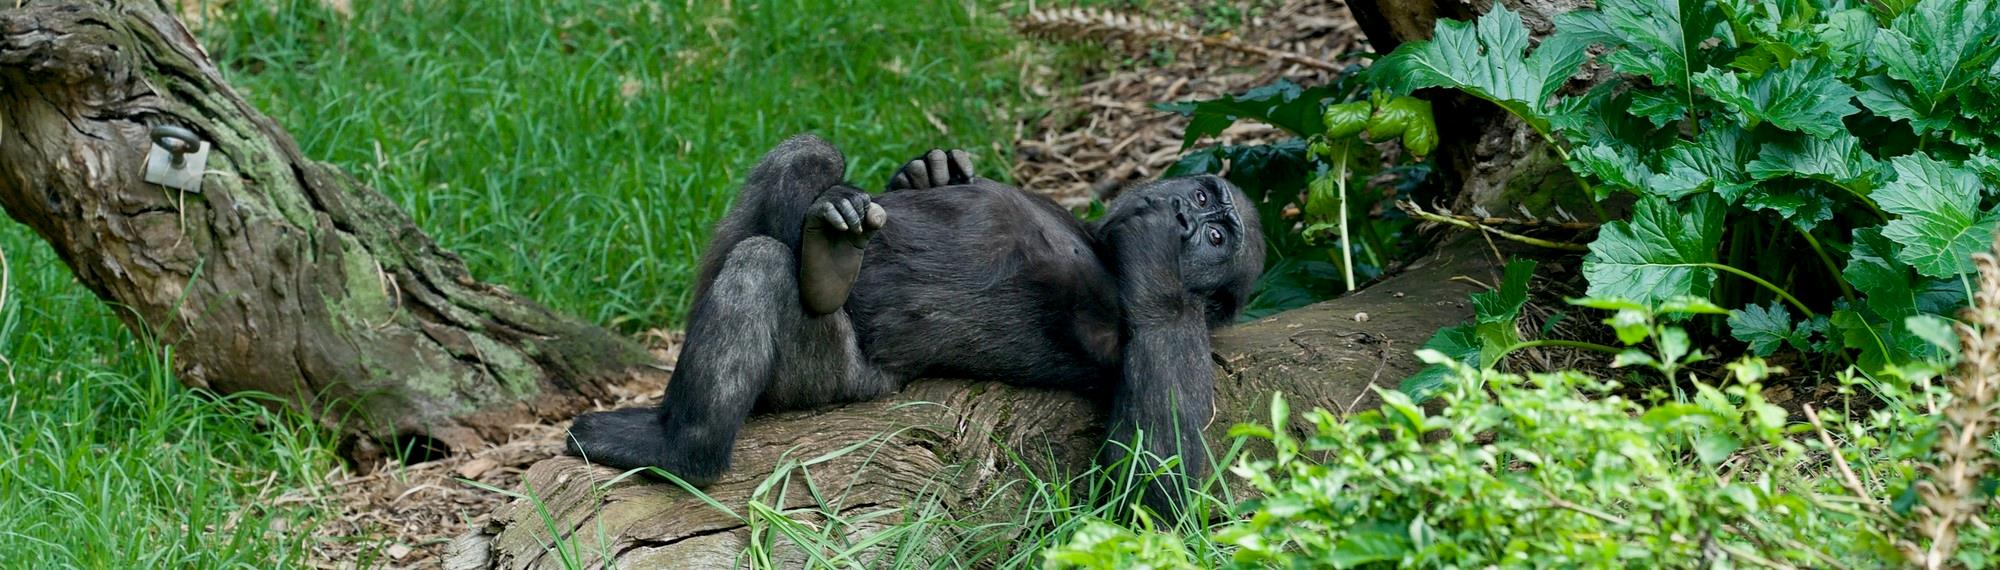 Western Lowland Gorilla lying on a log looking very relaxed with its legs crossed.